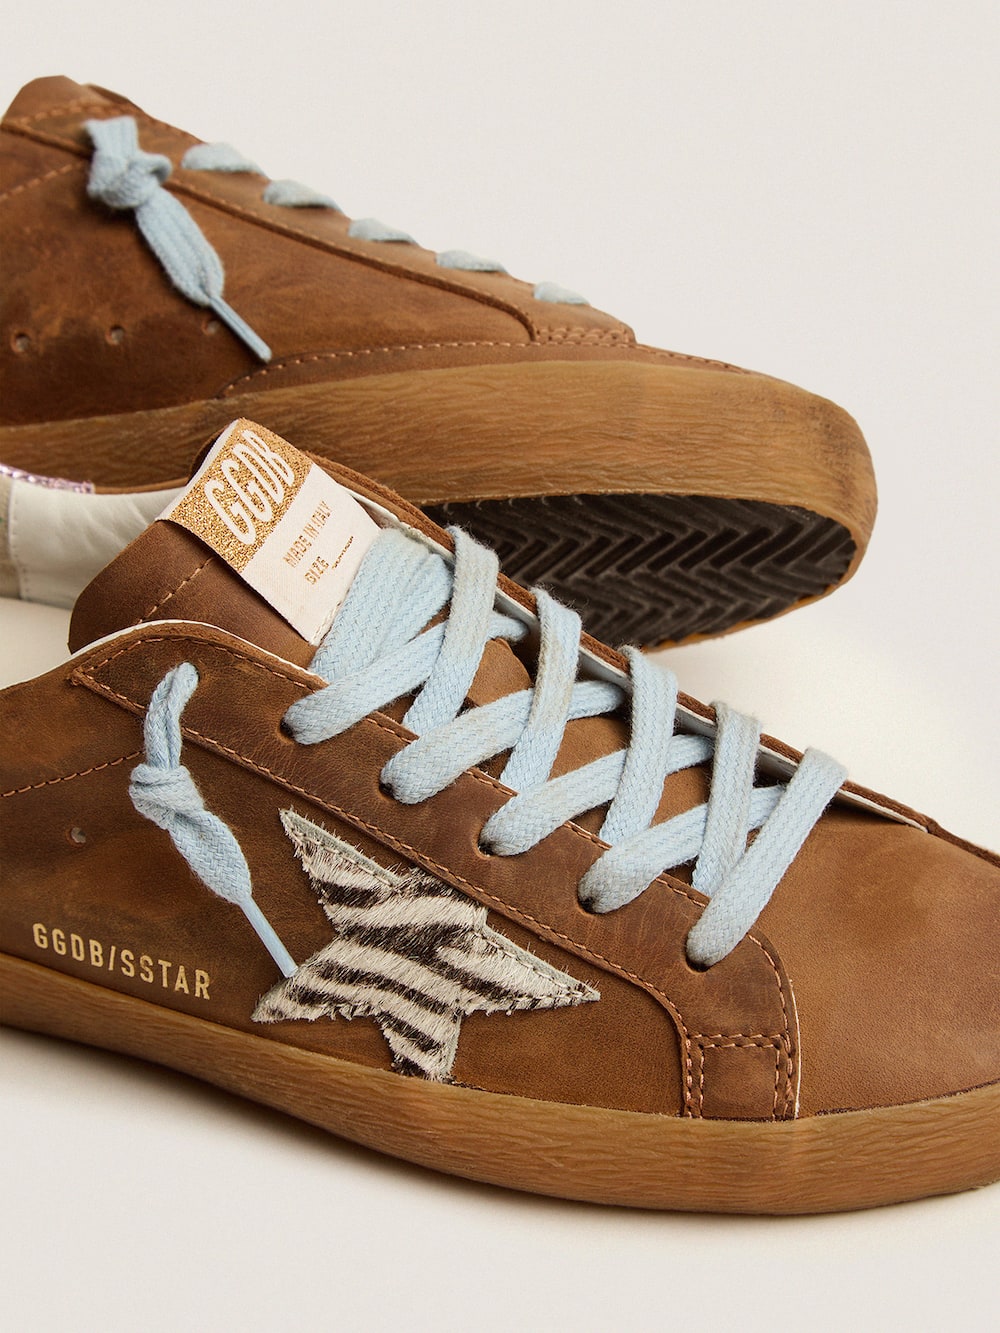 Golden Goose - Super-Star sneakers in brown waxed suede with a zebra-print pony skin star in 